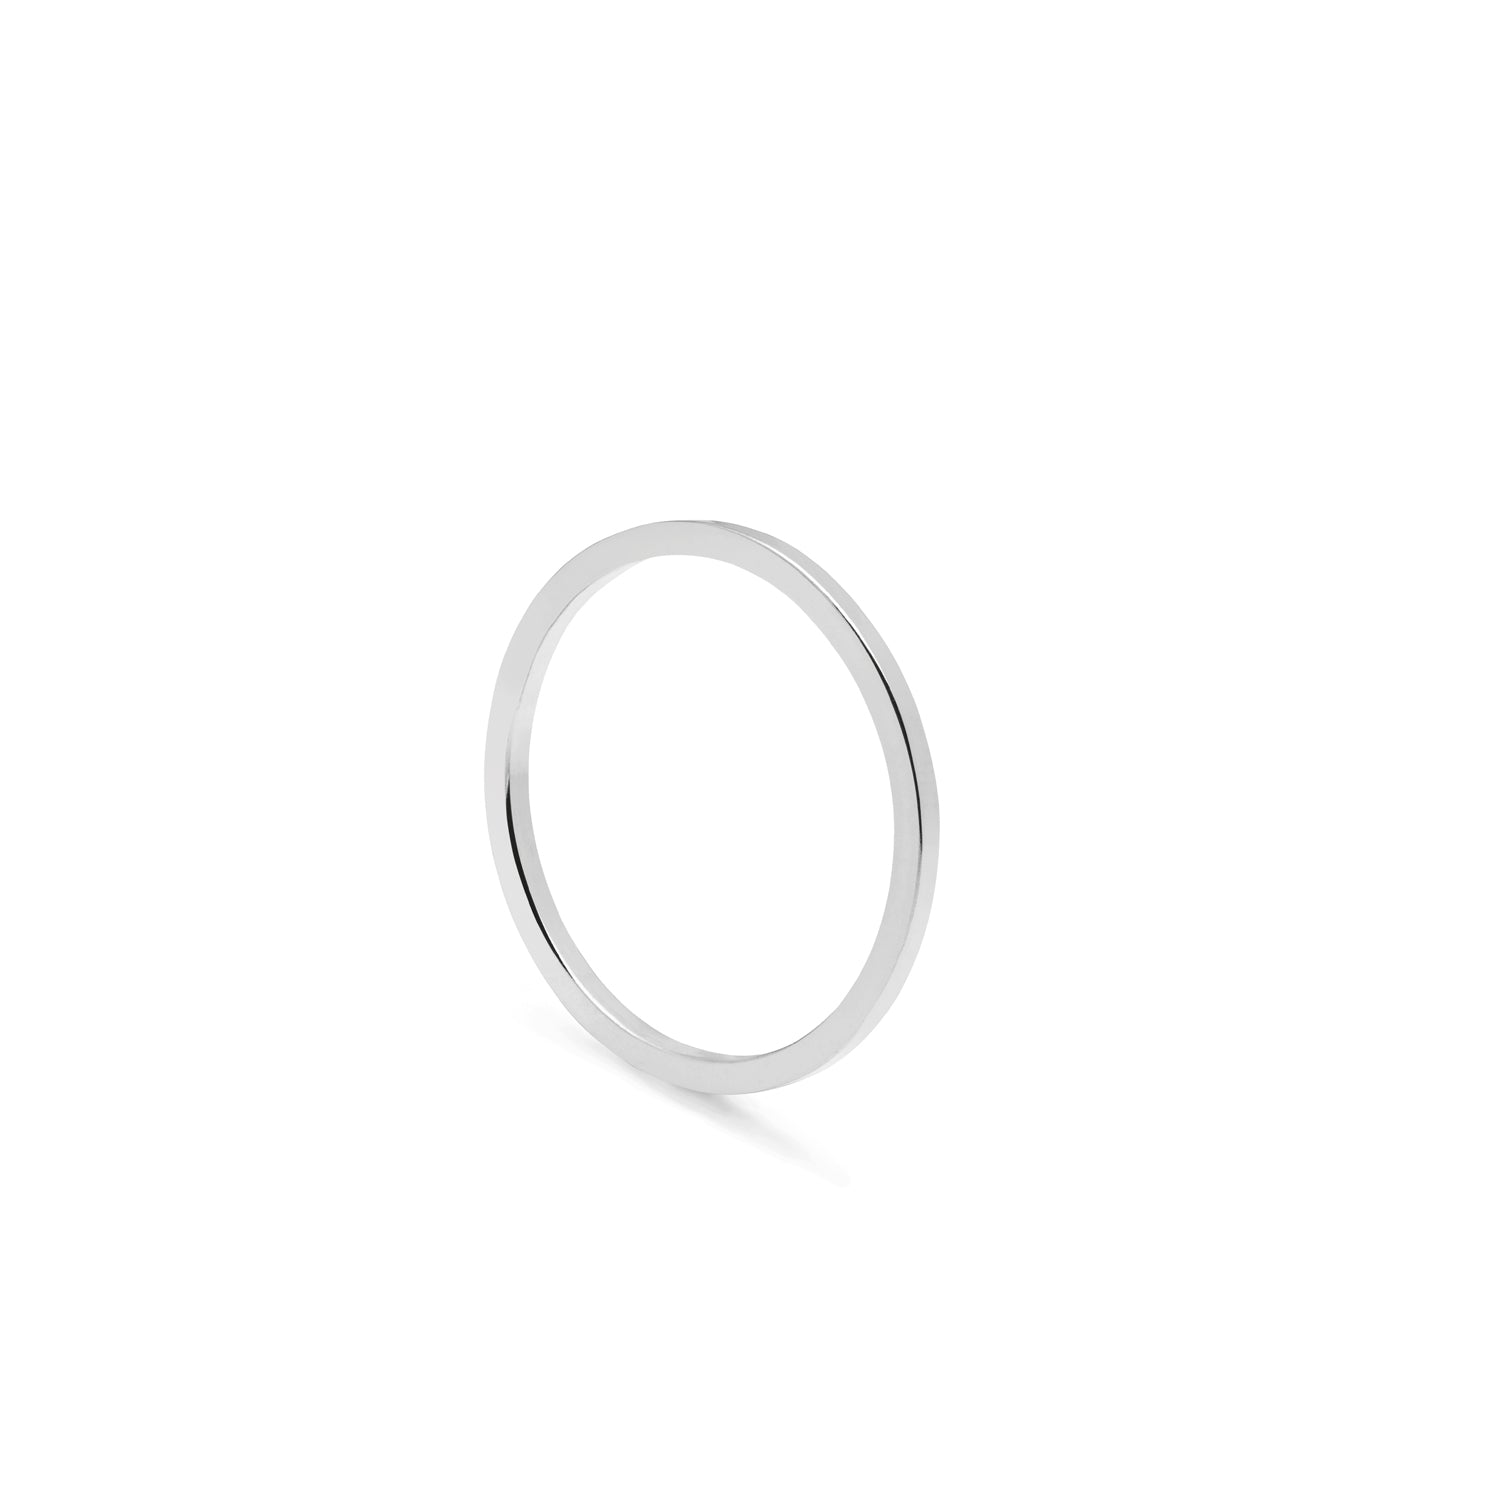 Skinny Square Stacking Ring - Silver - Myia Bonner Jewellery